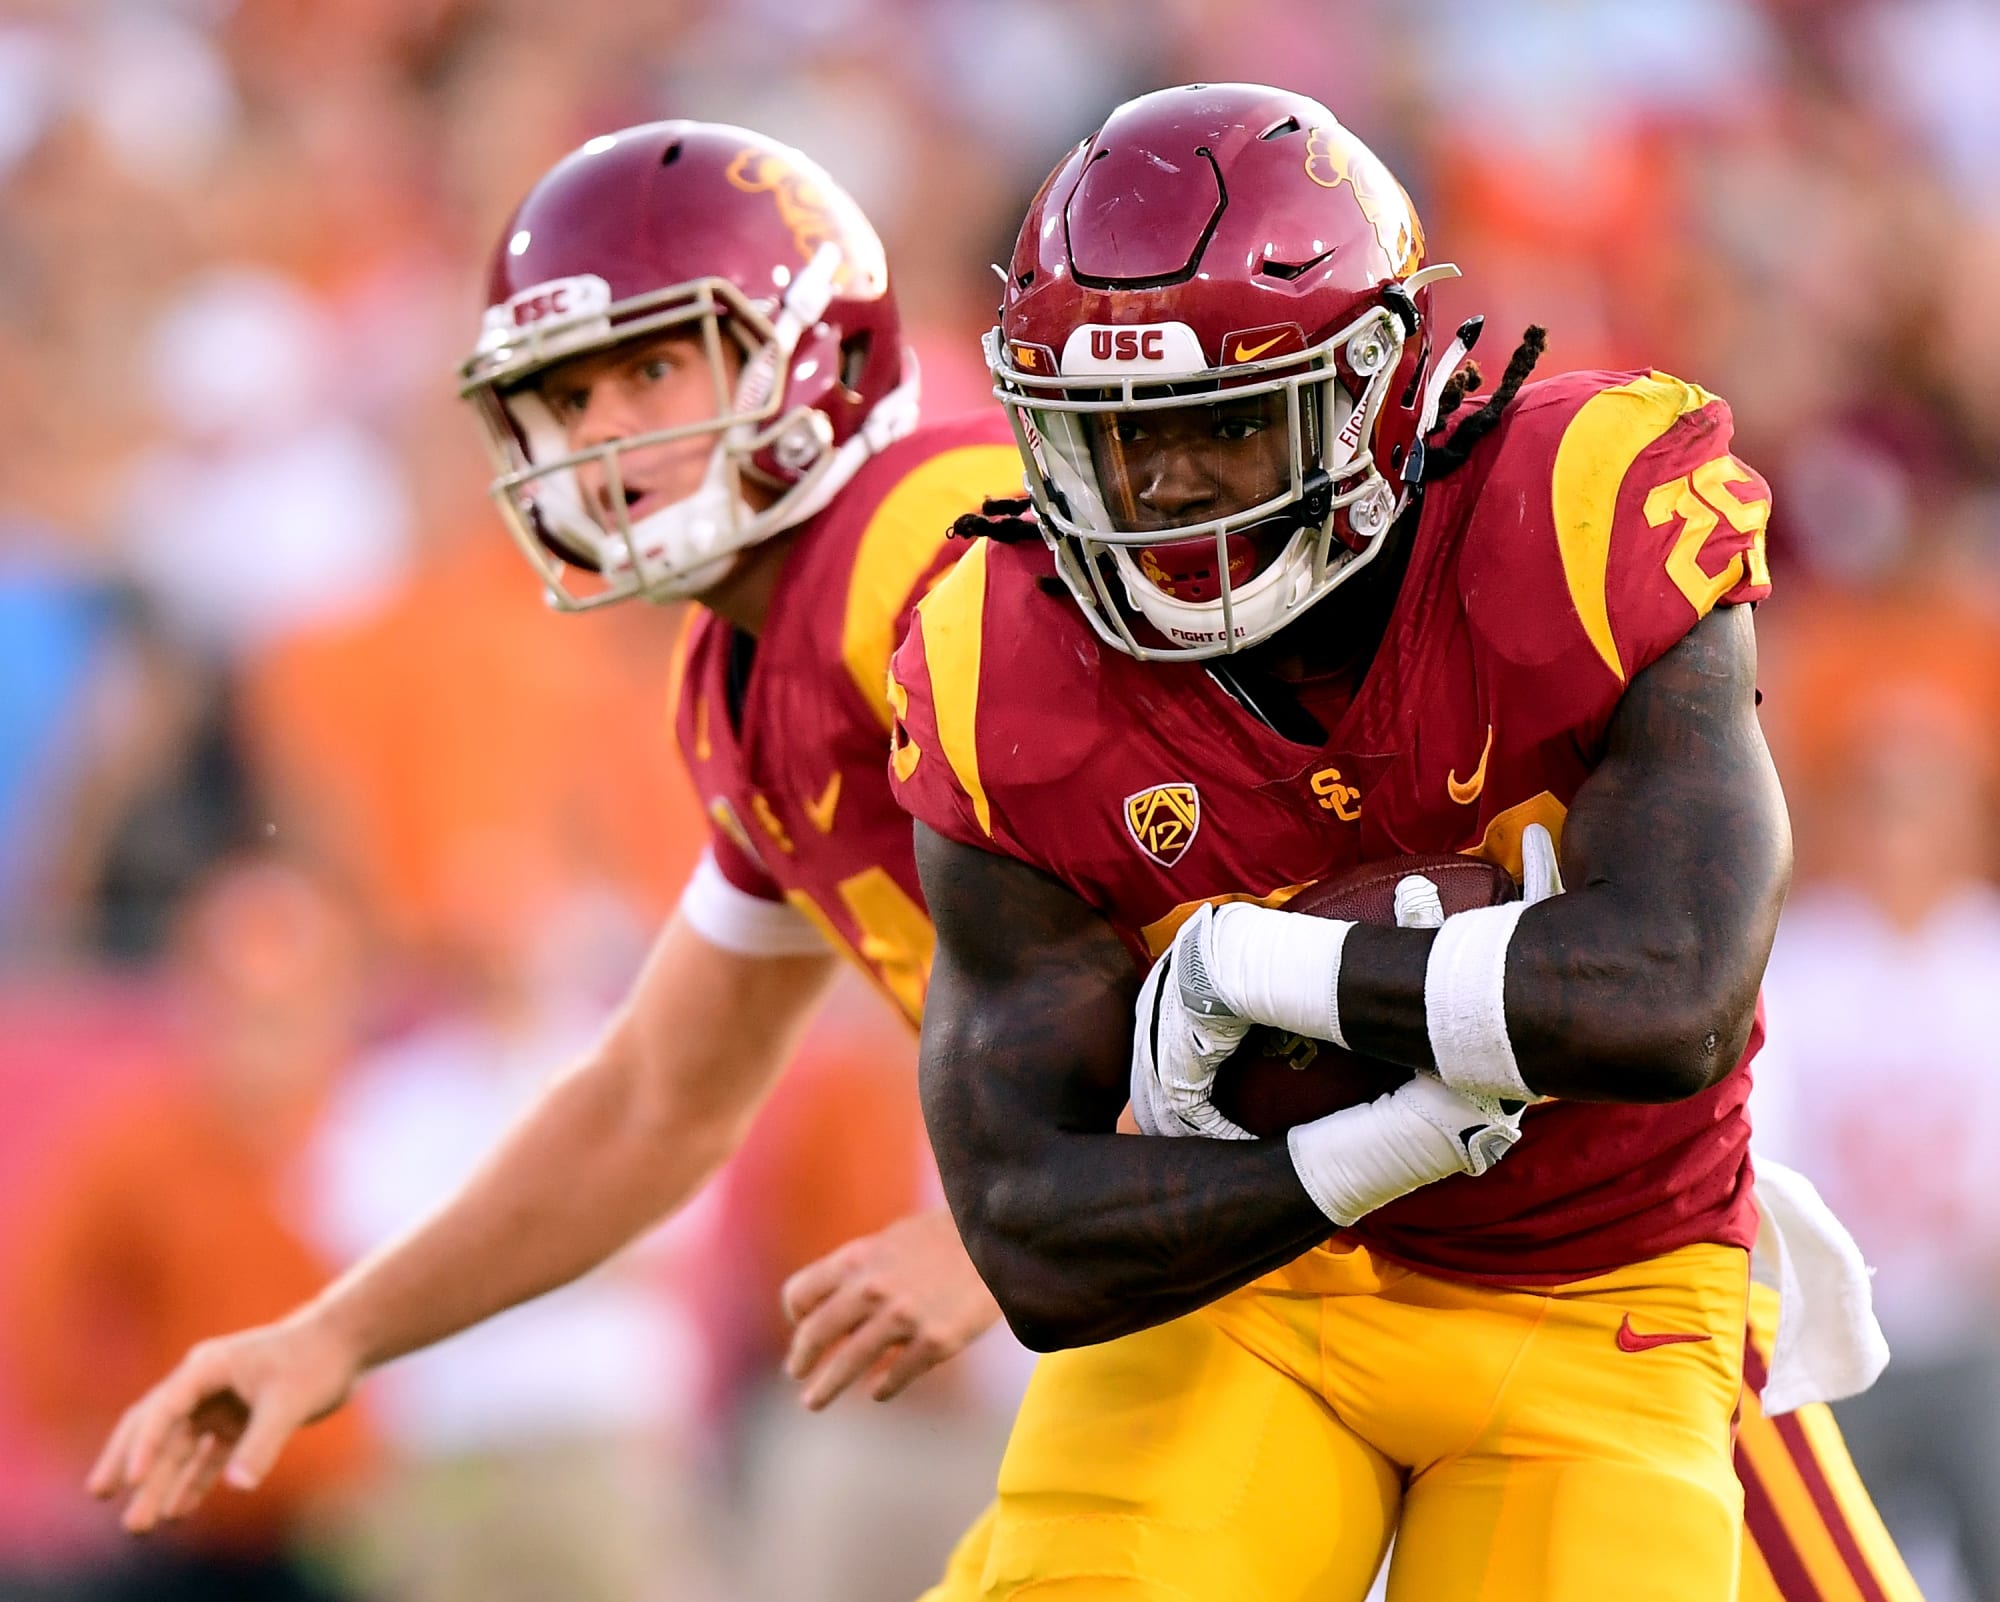 USC Football Preview: Out for revenge against Utah - Page 2